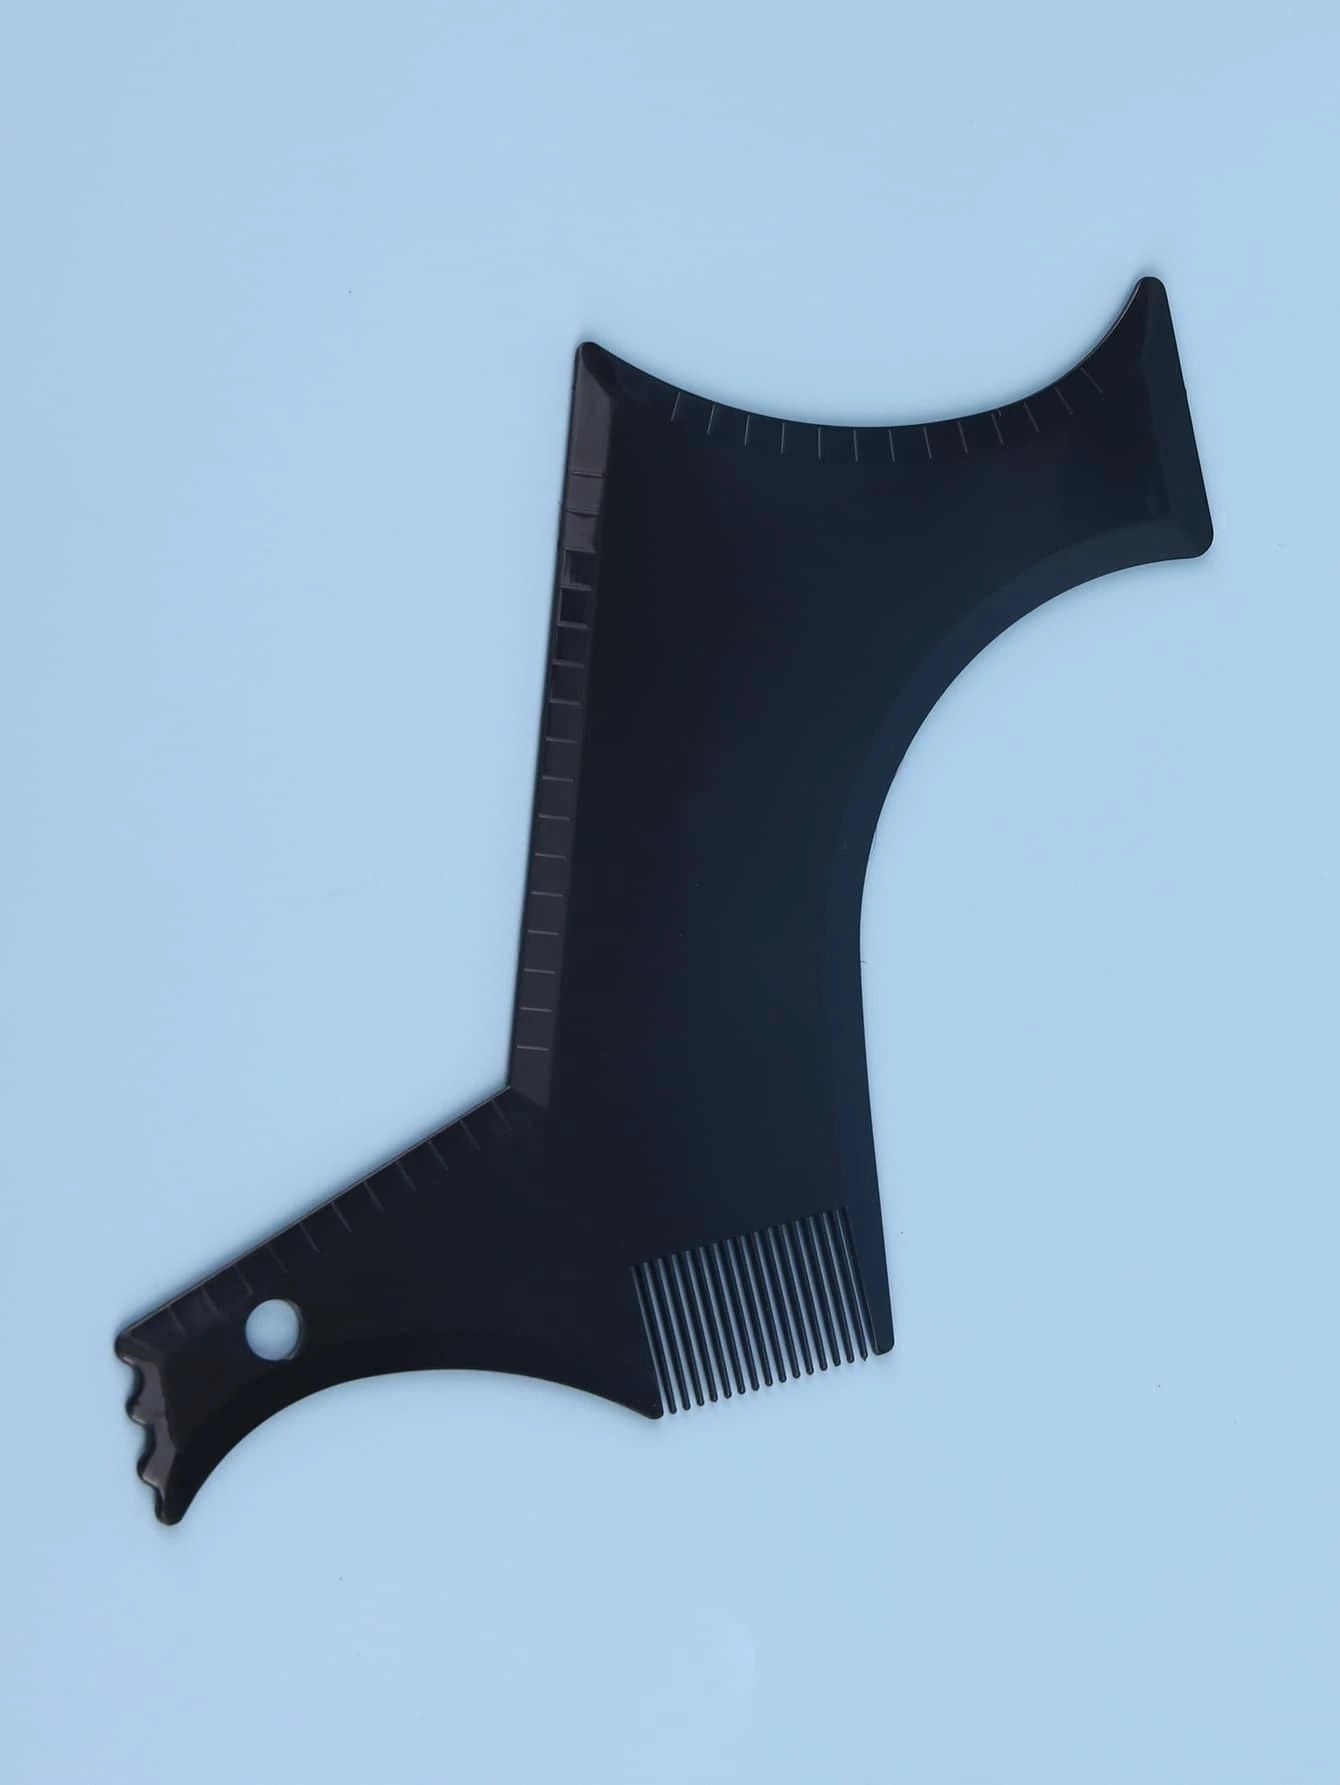 Beard styling tool, beard styling template for symmetrical curve trimming of chin, cheeks and neckline, can be used with a beard trimmer or razor